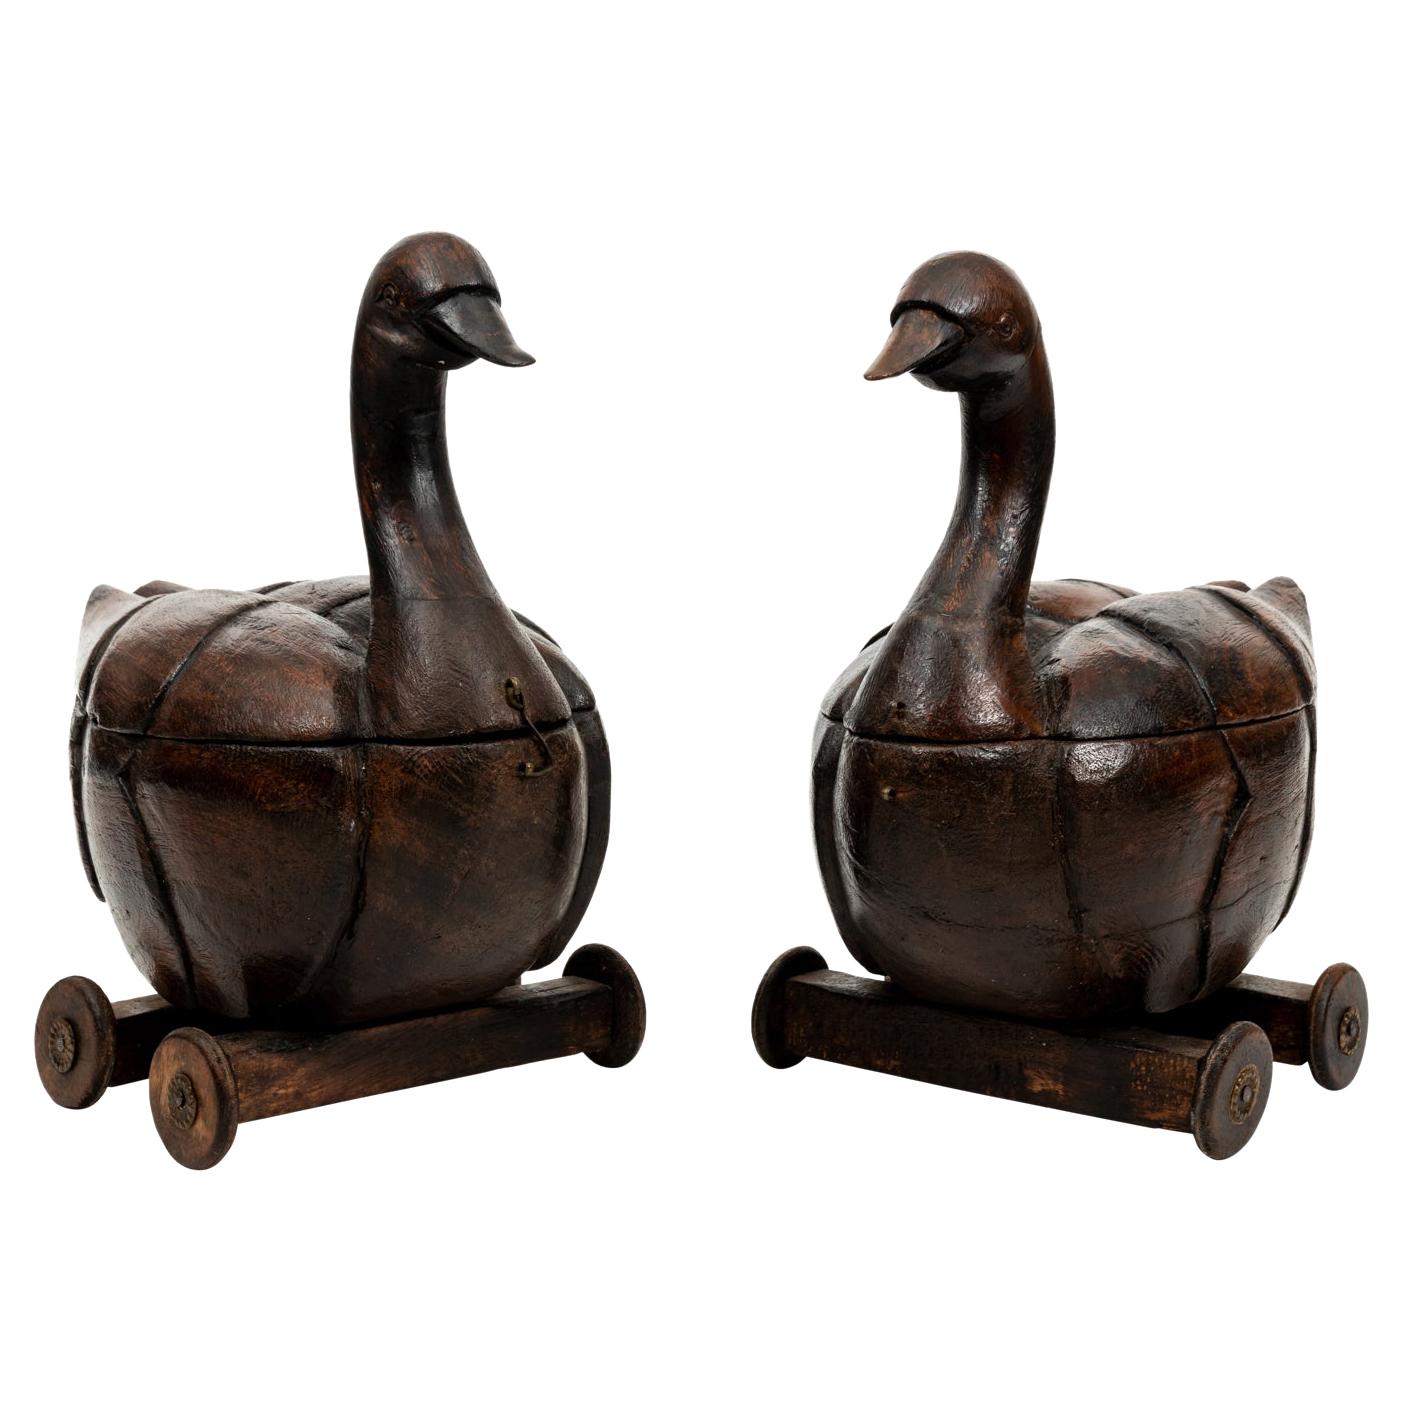 Pair of Carved Wooden Ducks